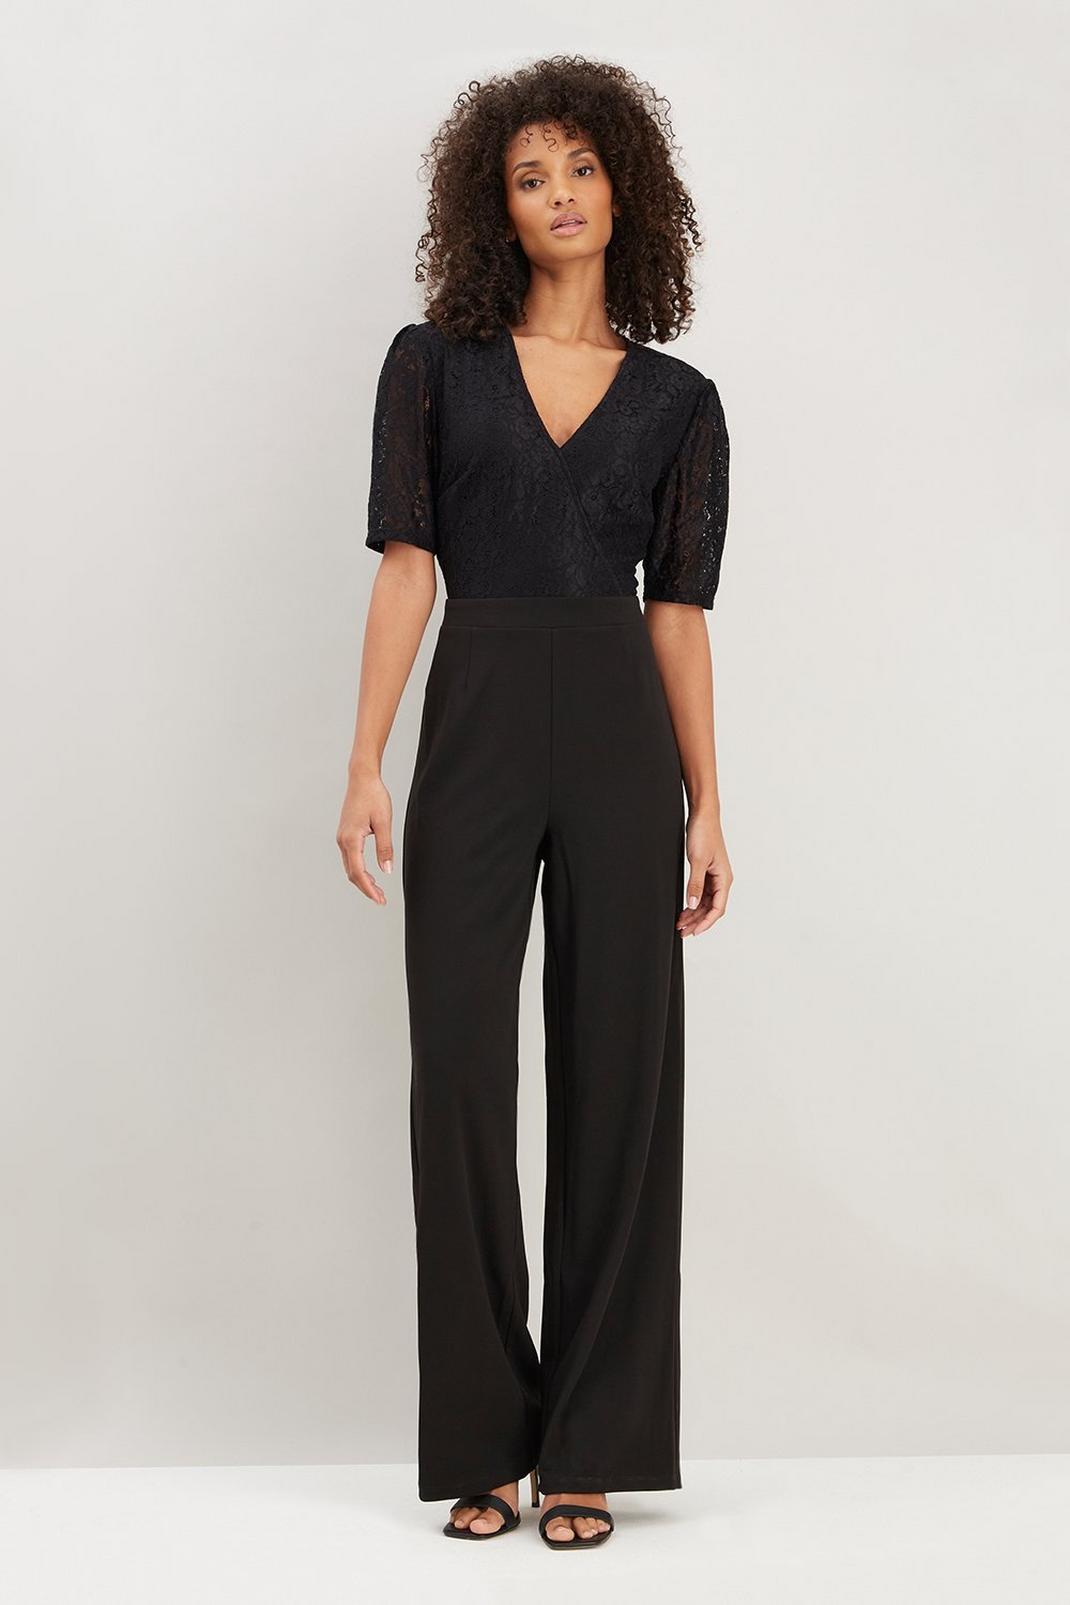 105 Tall Black Lace Wrap Top Jumpsuit image number 1